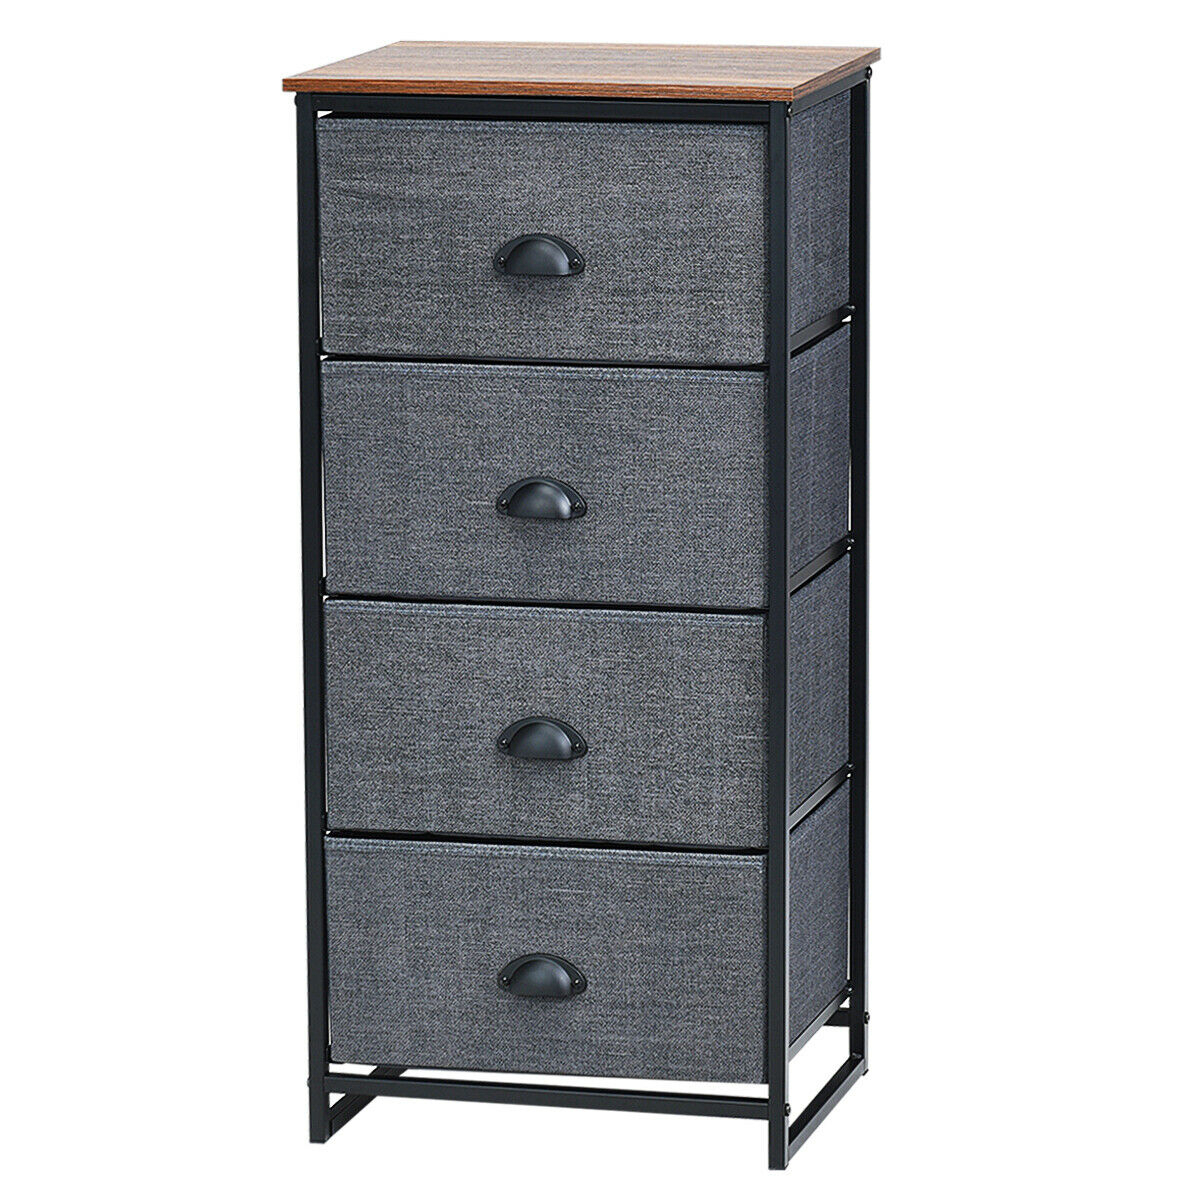 4 Drawers Dresser Chest Storage Tower Side Table Display Home Furniture - Black